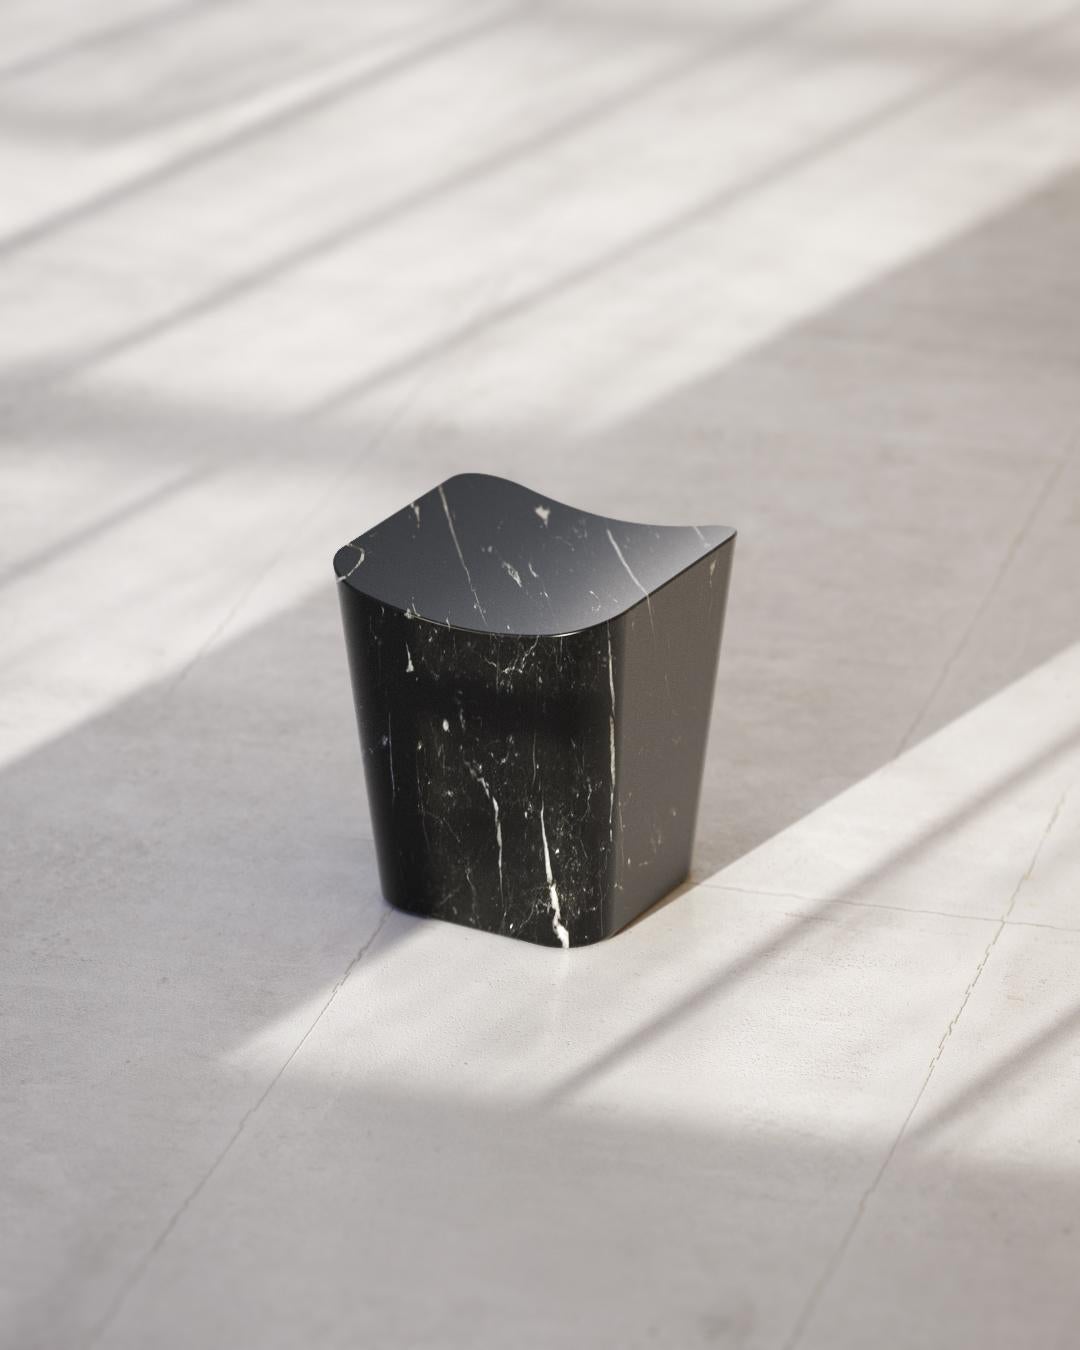 Grafite cono stool by Marmi Serafini
Materials: Grafite marble.
Dimensions: W 40 x D 40 x H 46 cm
Also available in other marbles (prices may vary)

Marmi Serafini is located in a small city named Chiampo, internationally well known for its